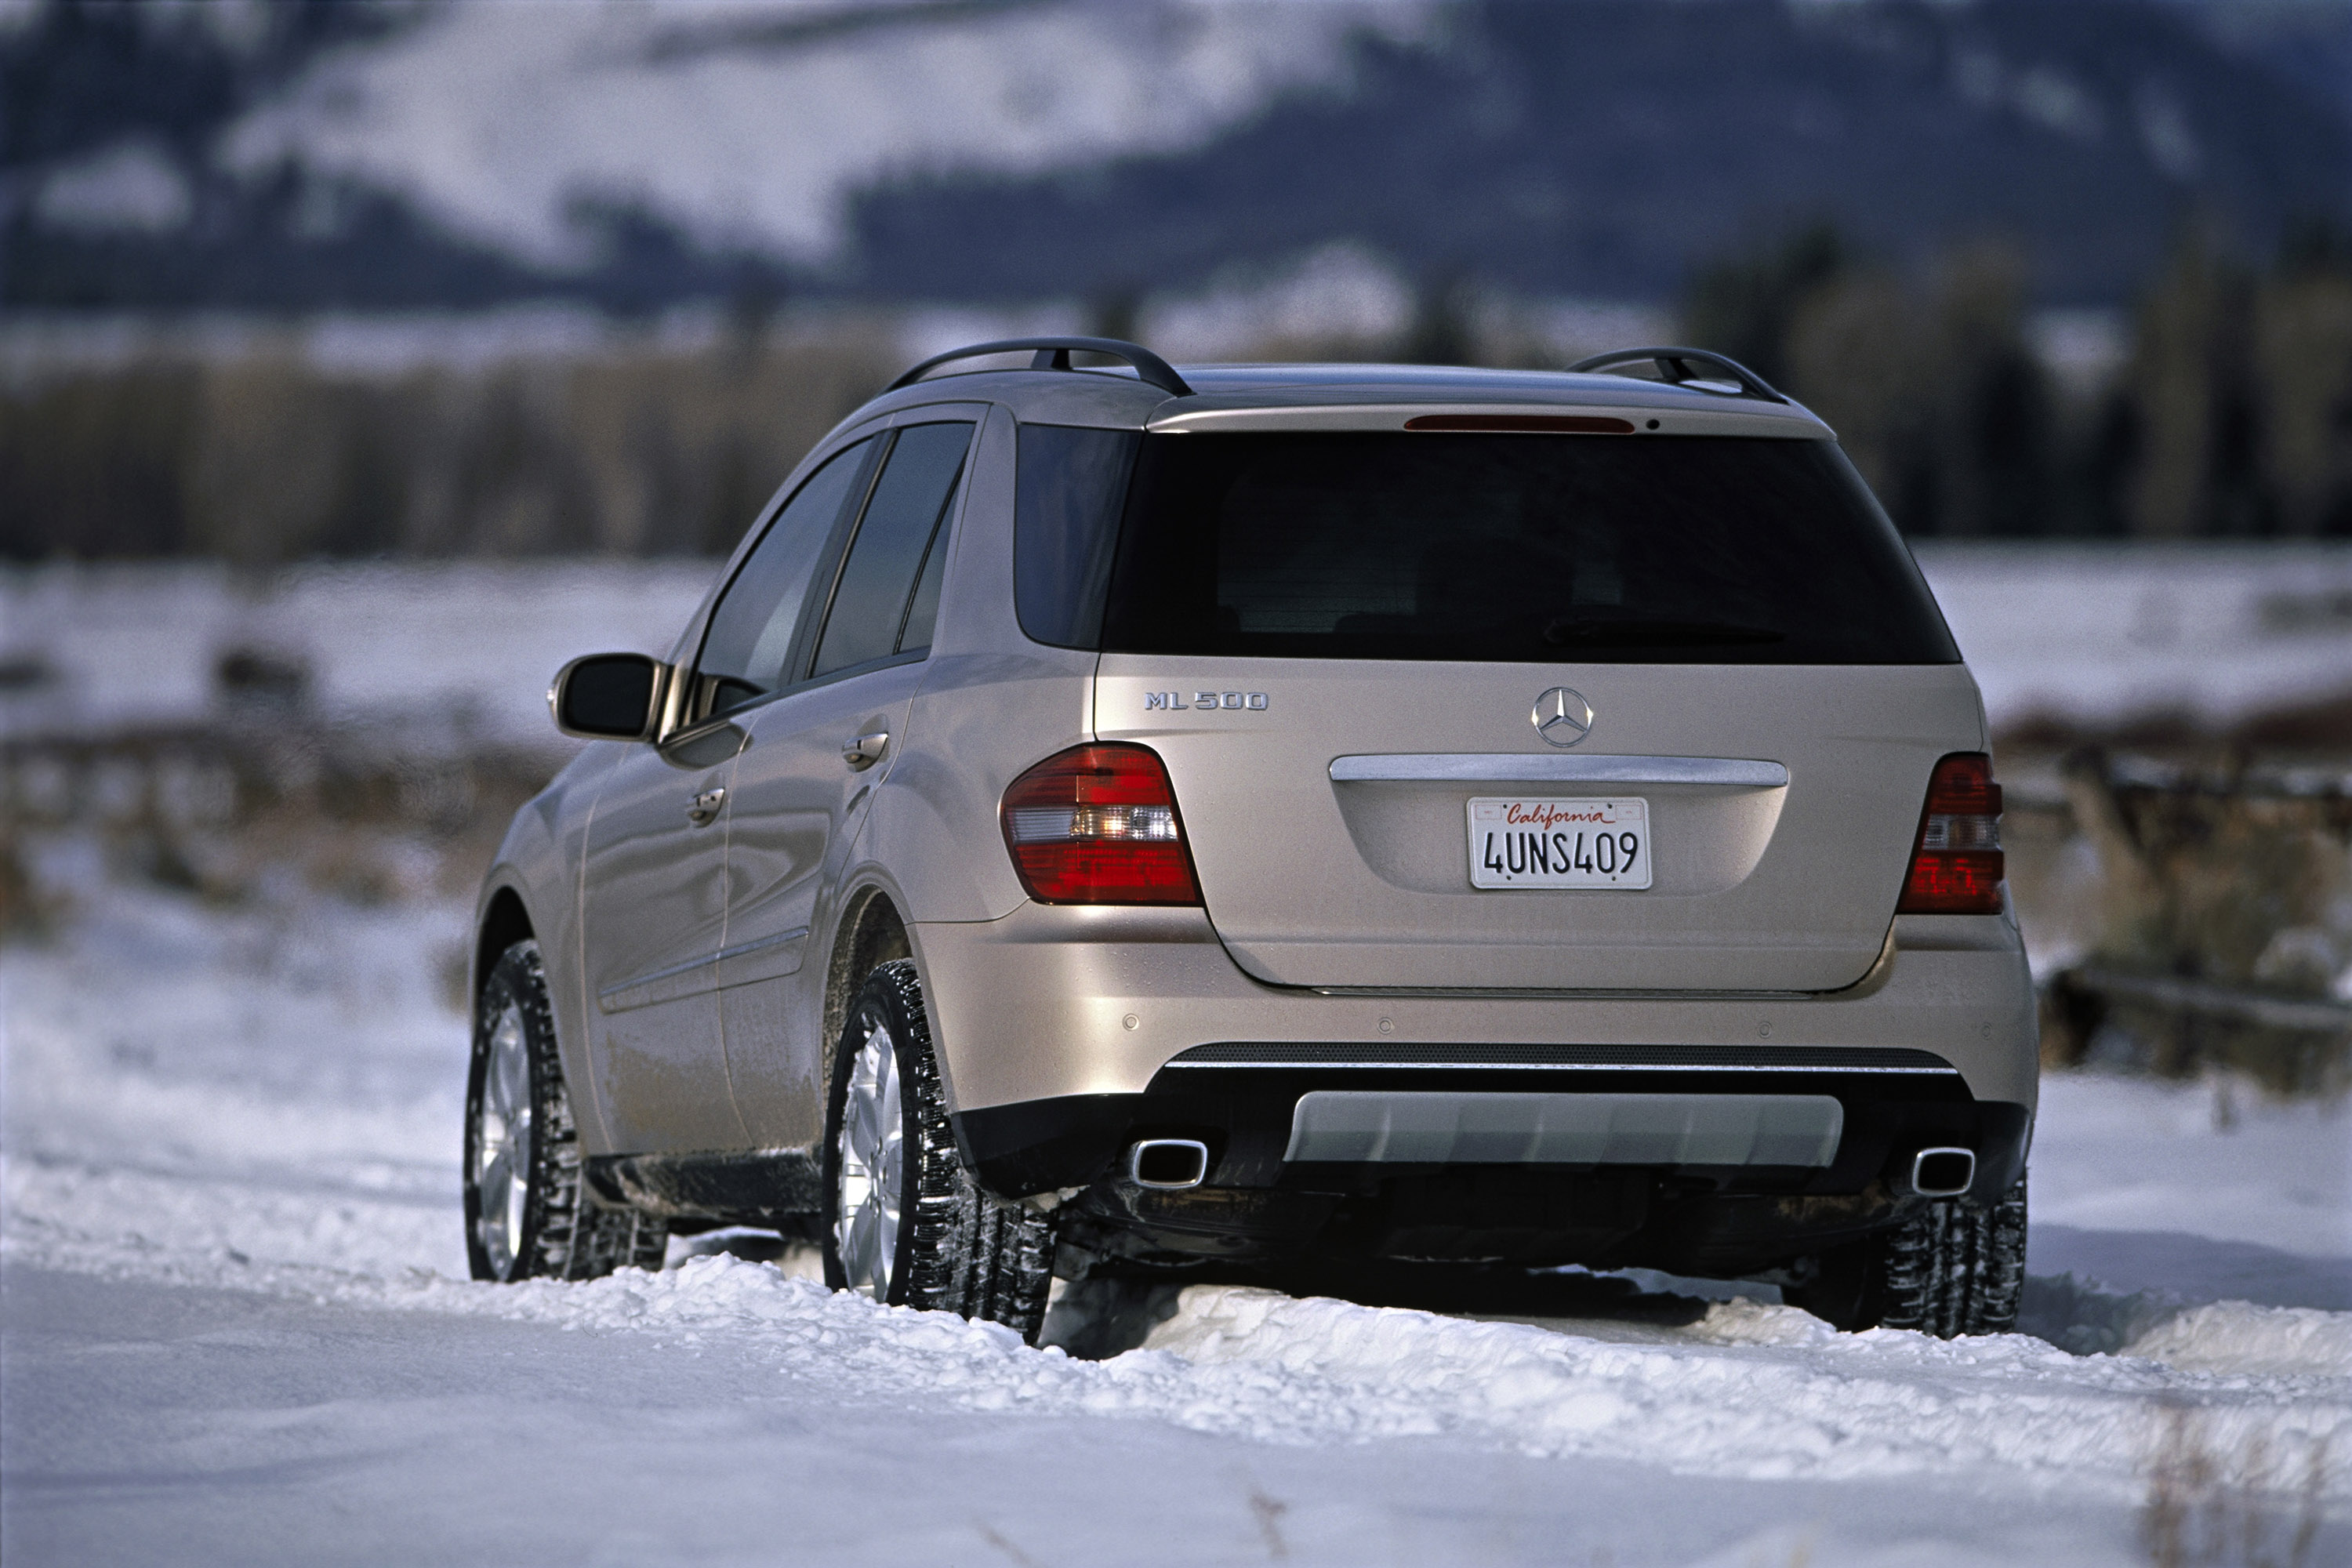 Mercedes Benz Ml500 06 Hd Picture 29 Of 33 3000x00